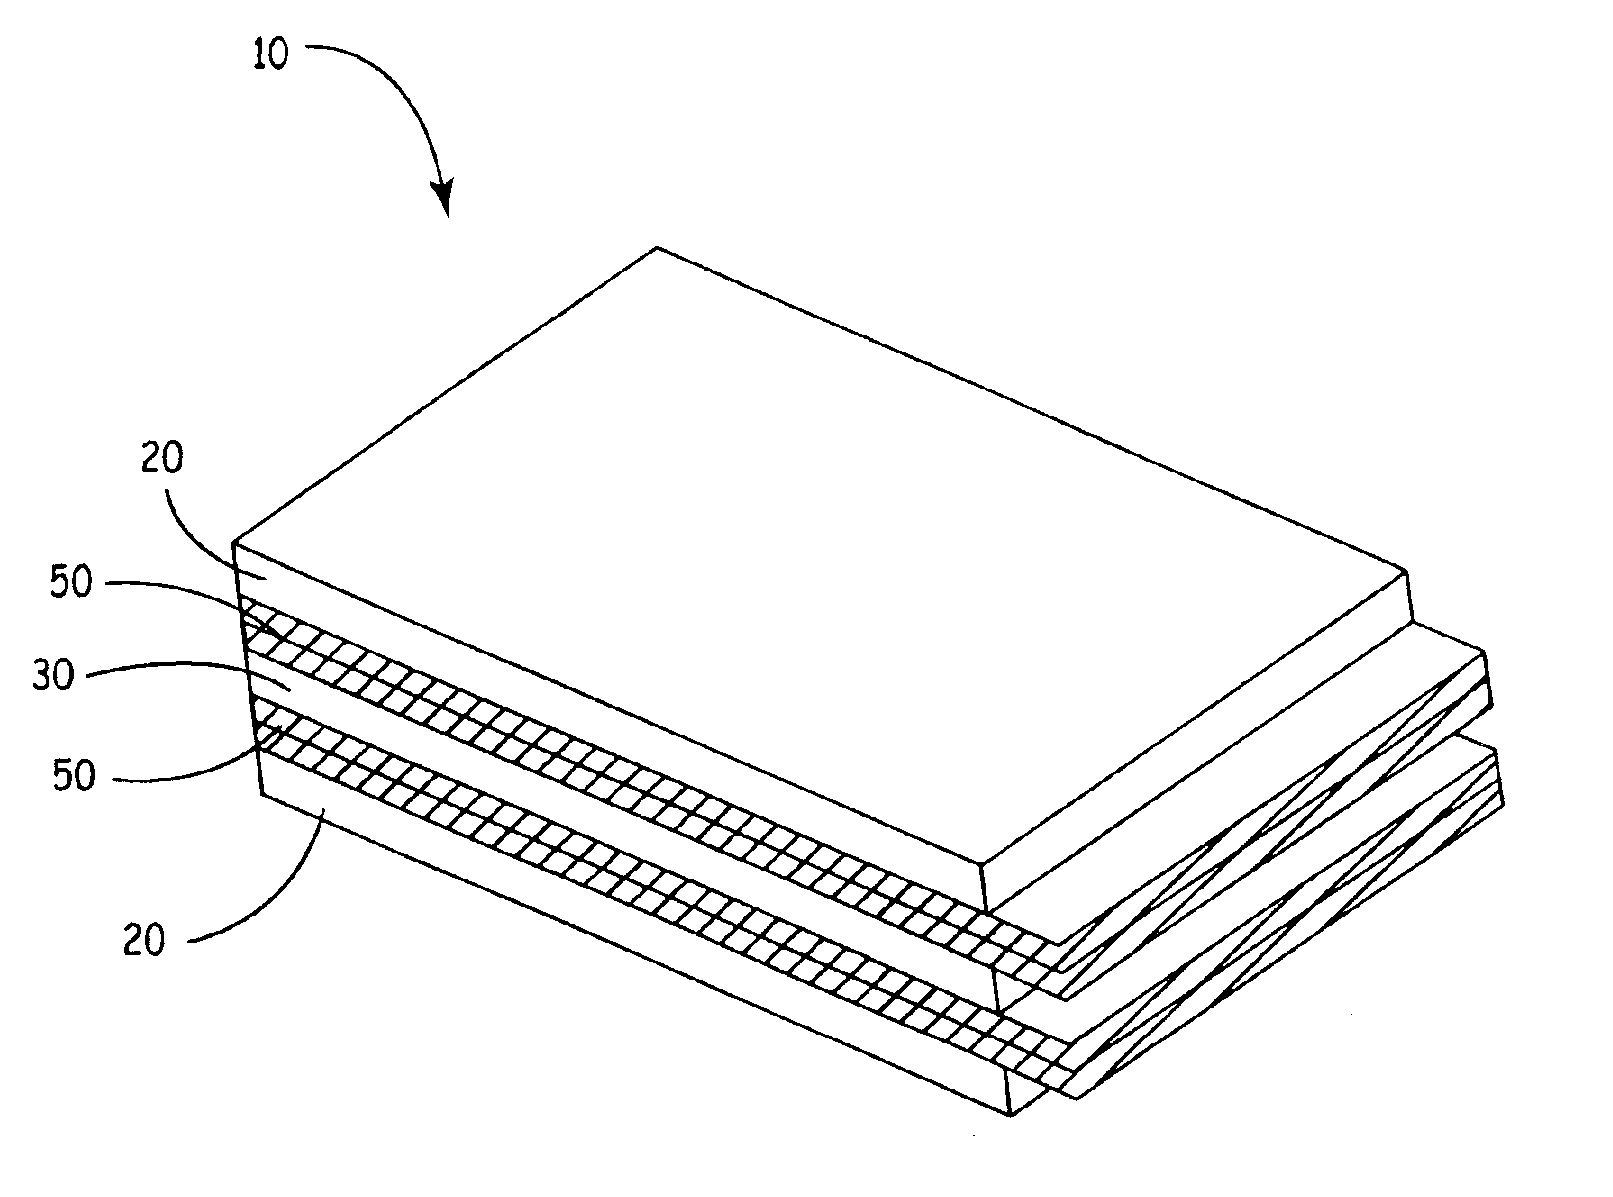 Capacitors including interacting separators and surfactants